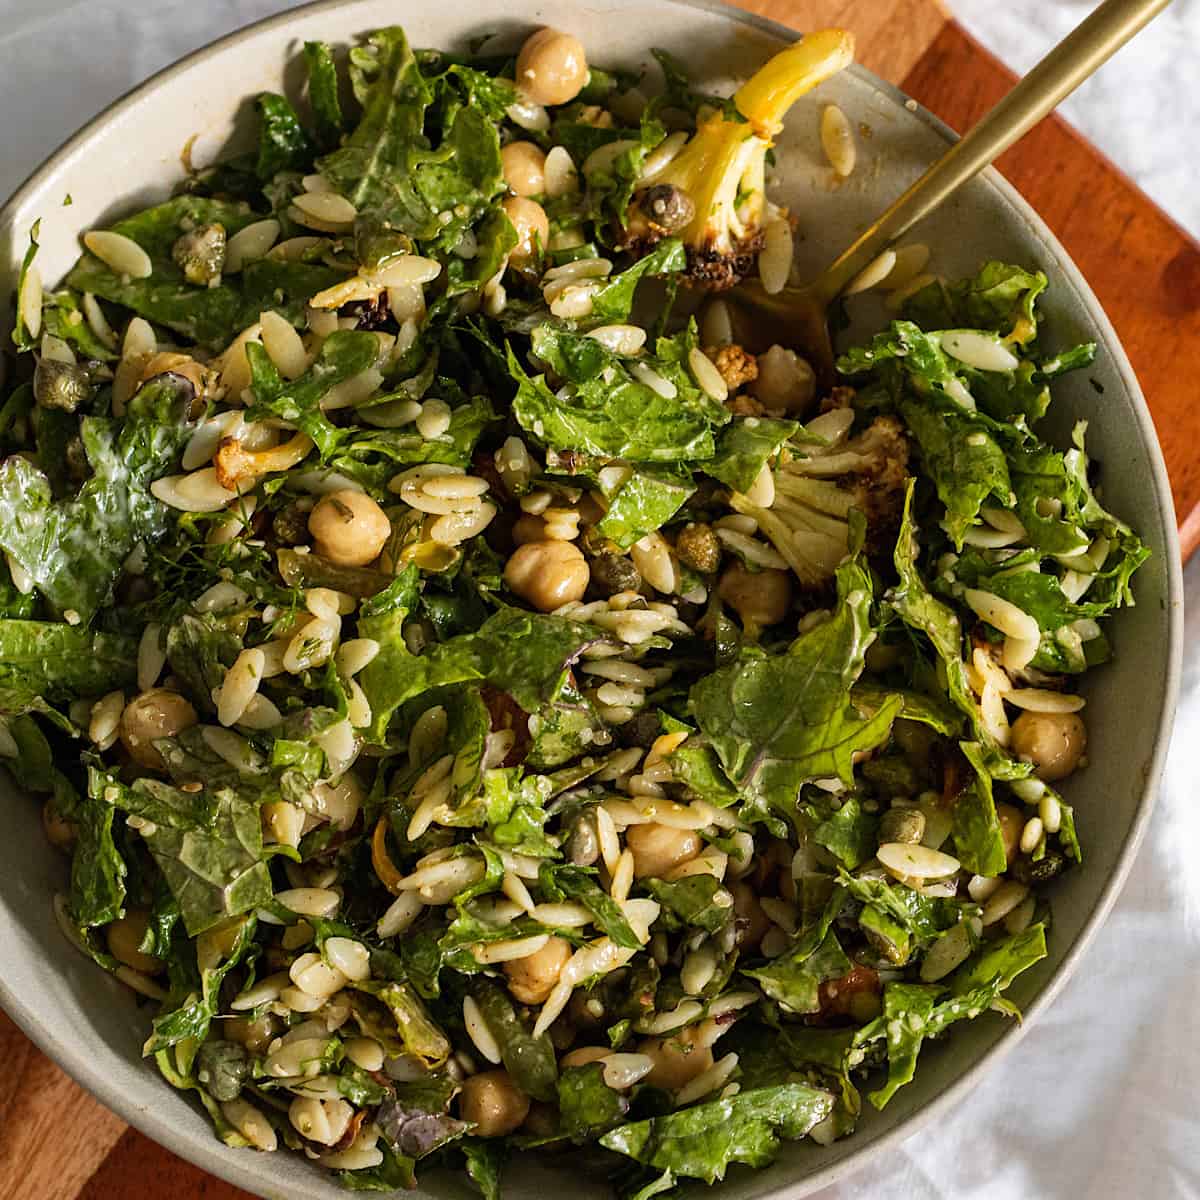 Overhead view of kale salad with chickpeas and orzo on a plate with a golden spoon on the side.